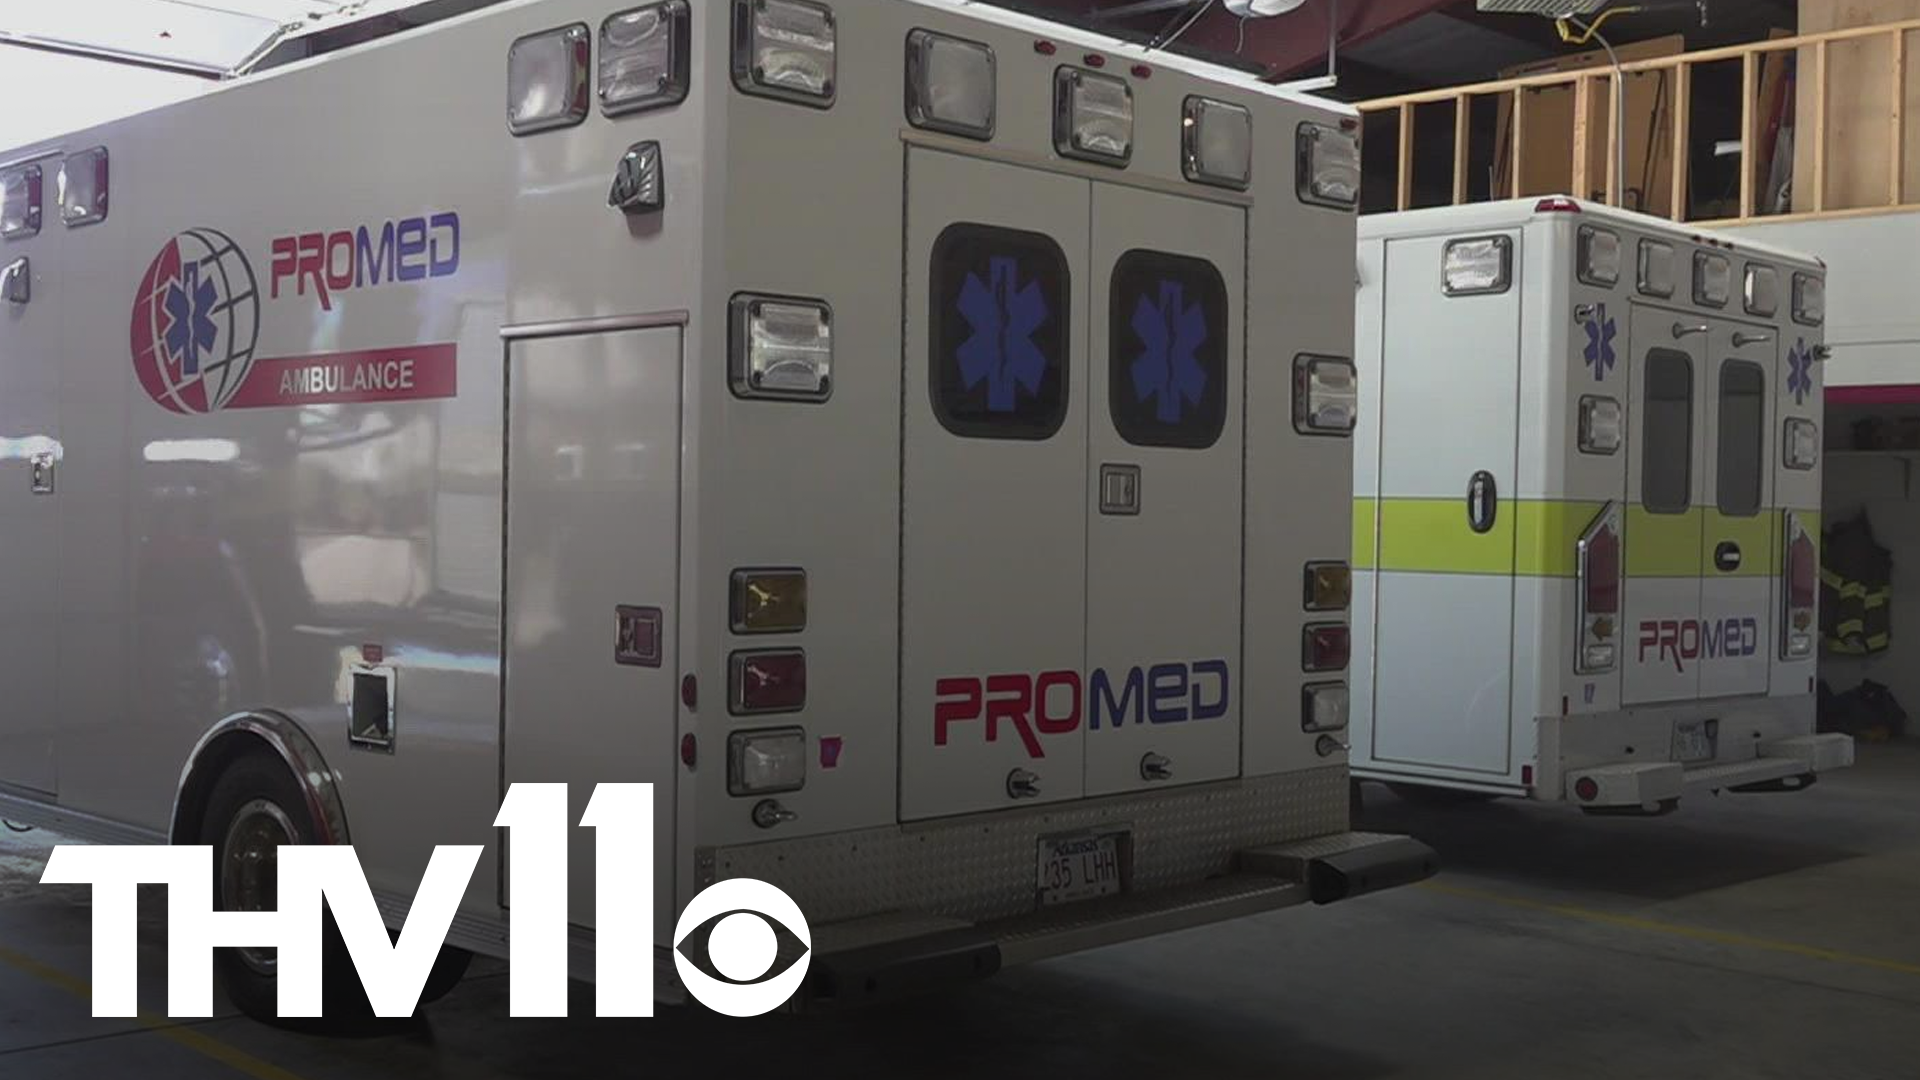 First responders are on standby 24 hours a day to respond to any medical emergency.